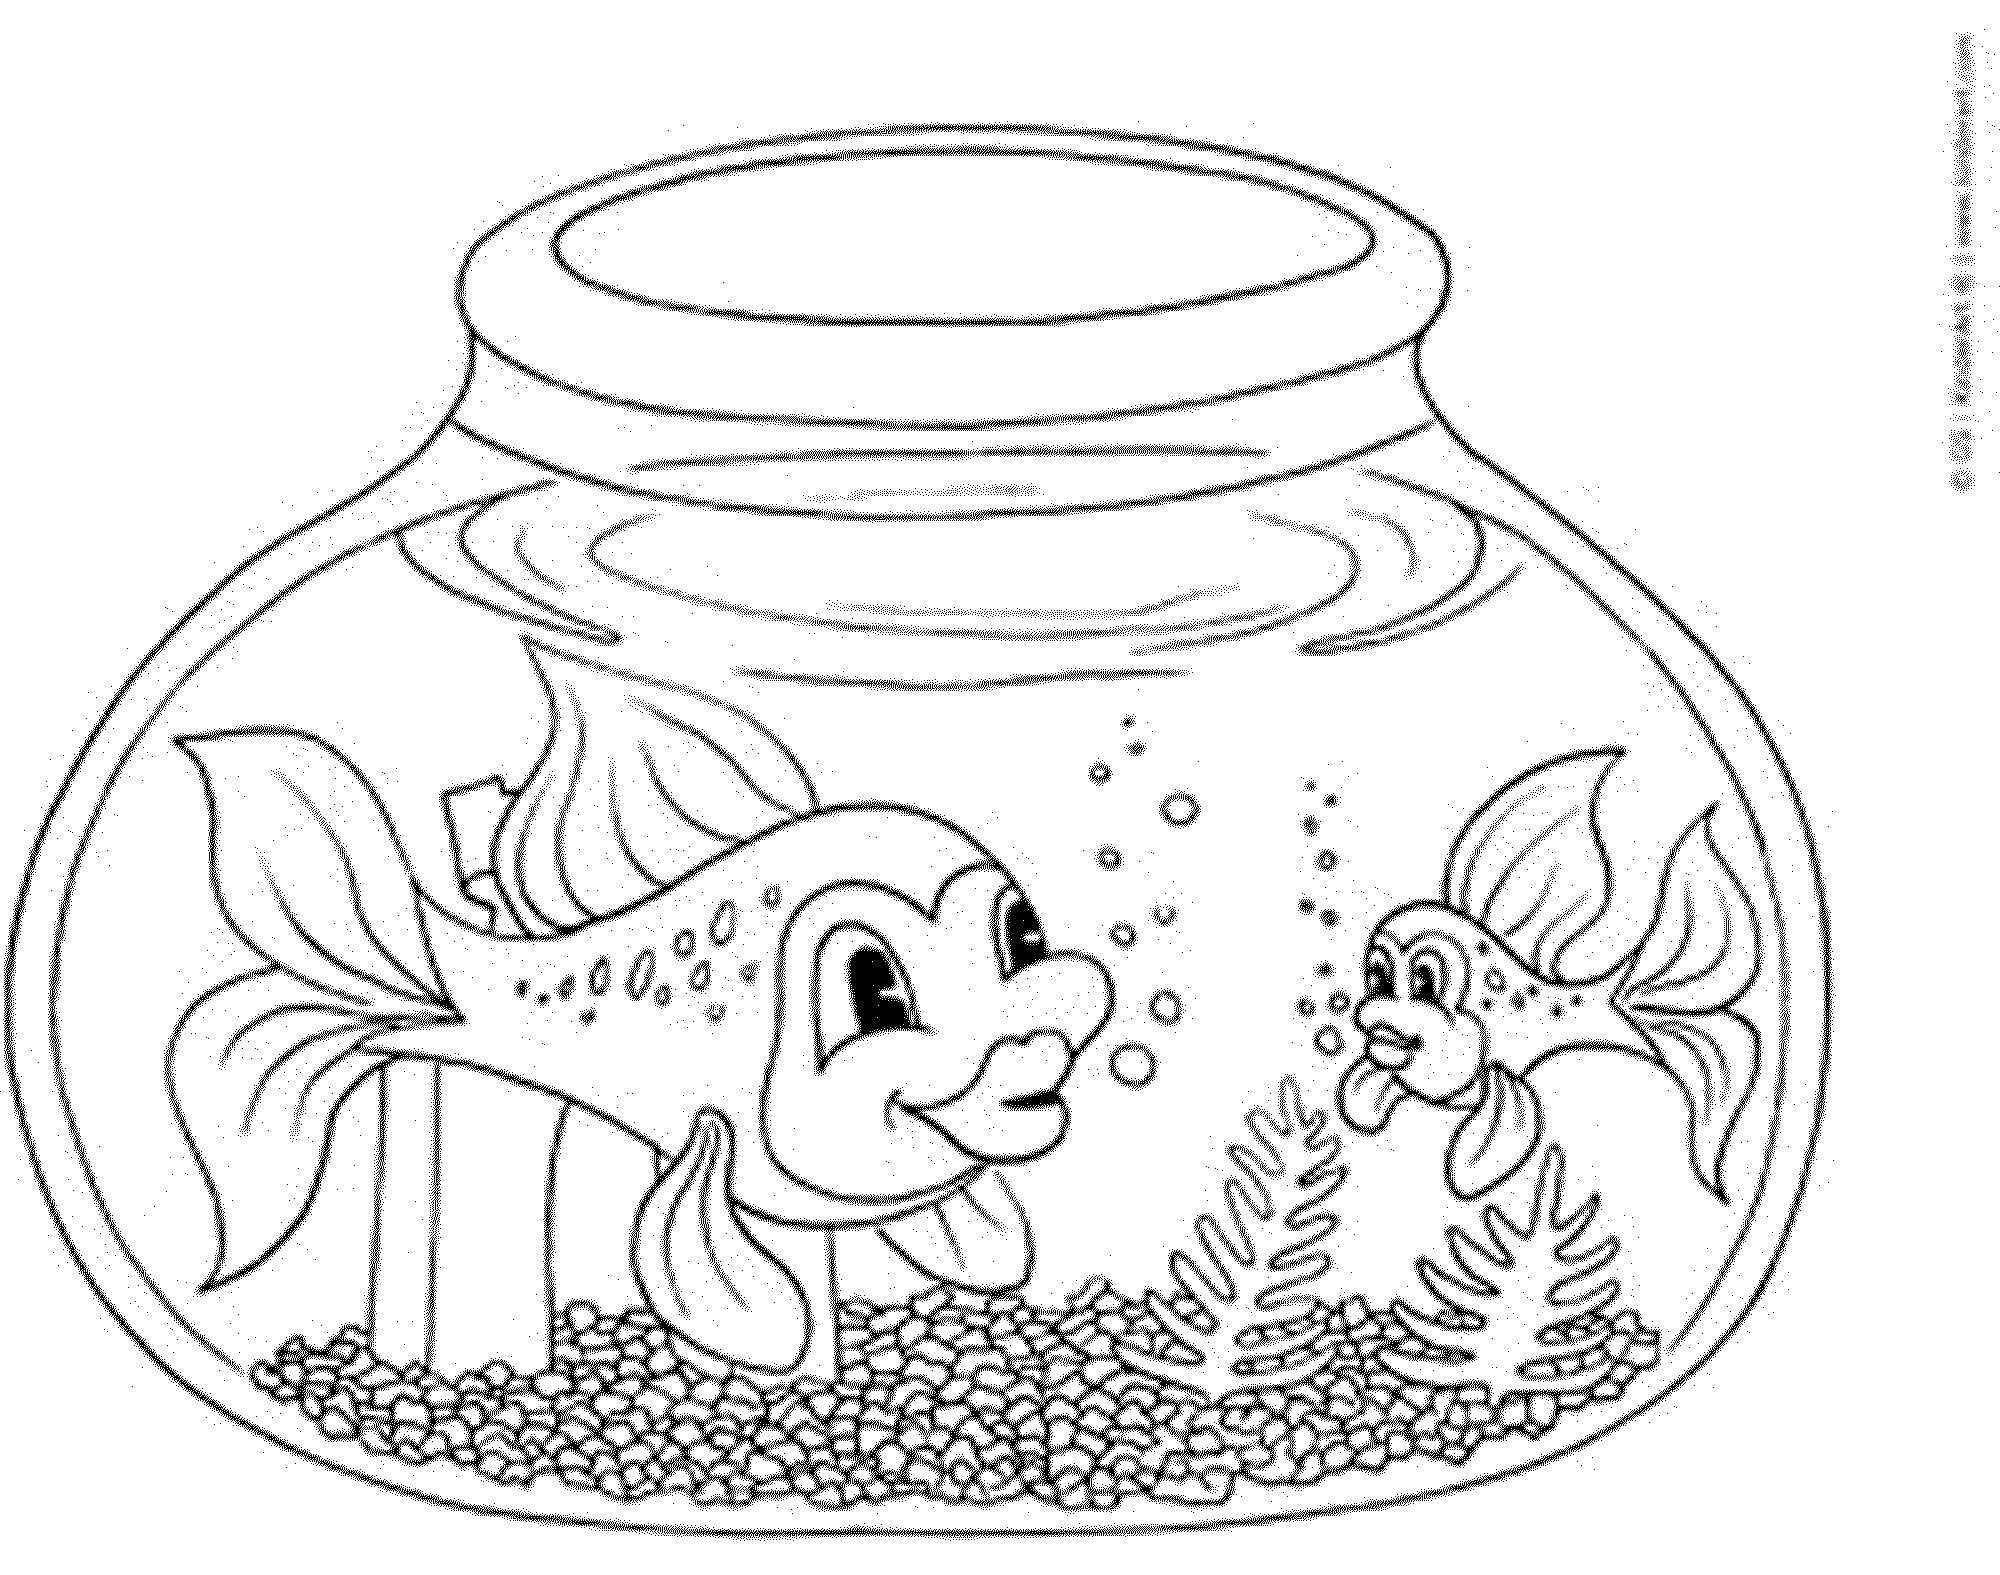 Coloring The fish in the aquarium. Category fish. Tags:  Underwater world, fish.